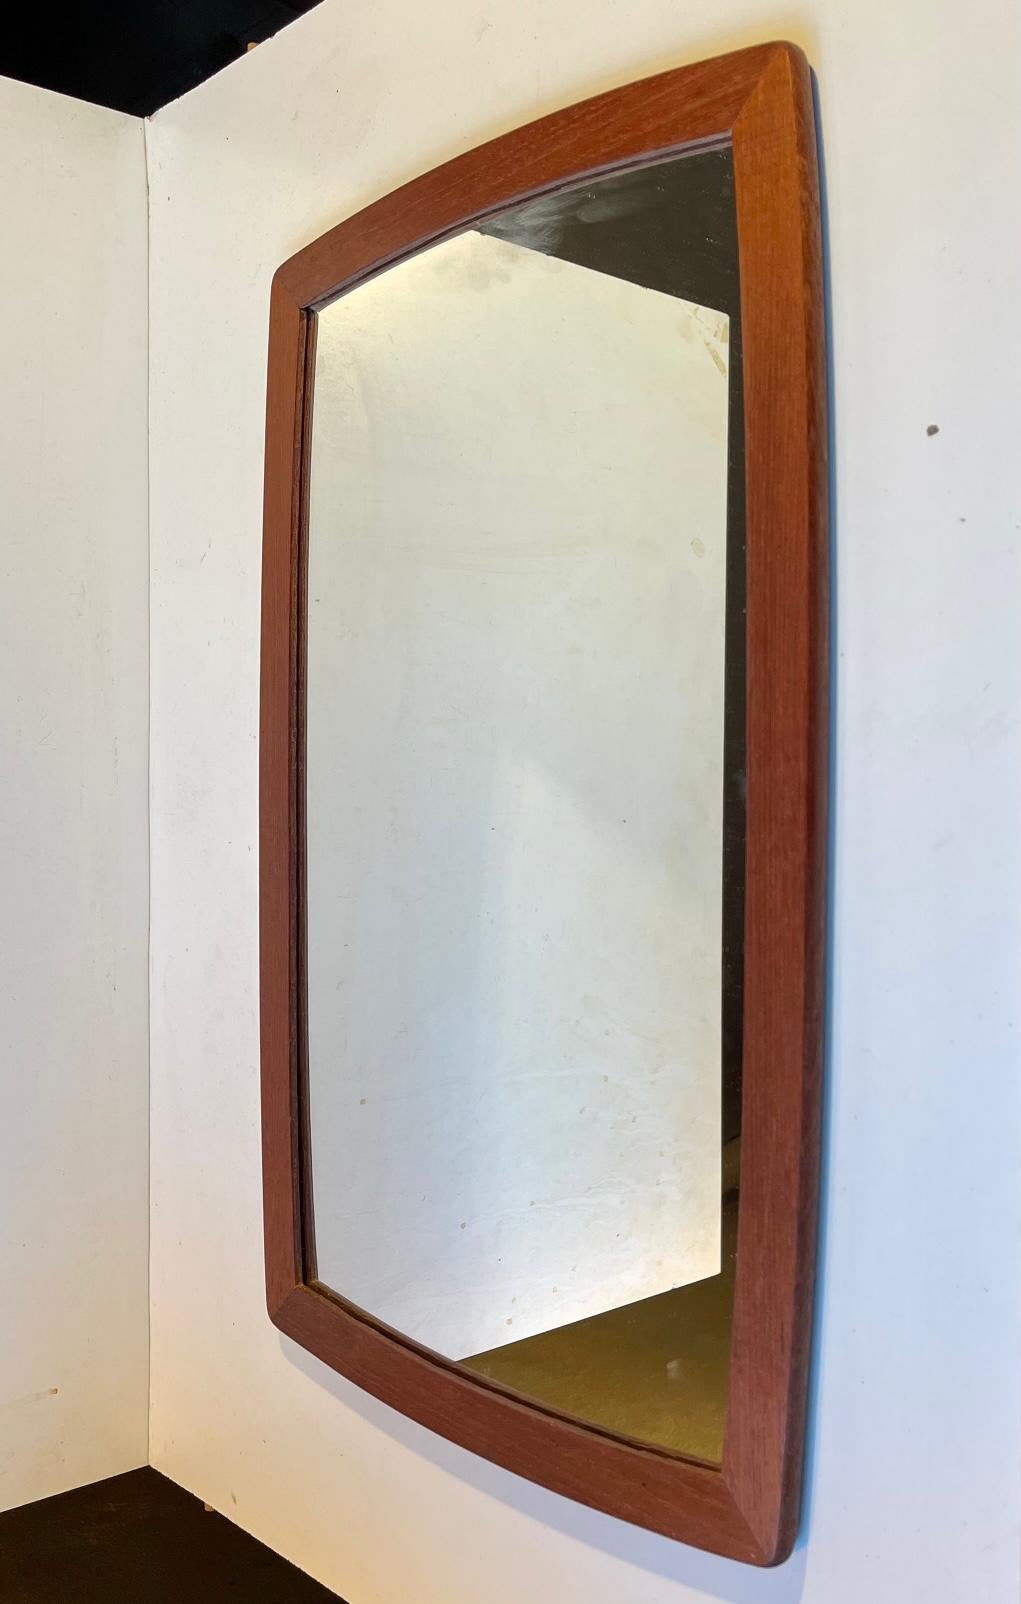 A small wall hung mirror with solid teak profiles. It was manufactured in Denmark during the 1960s. Wellkept original condition. Measurements: 52x32.5 cm.